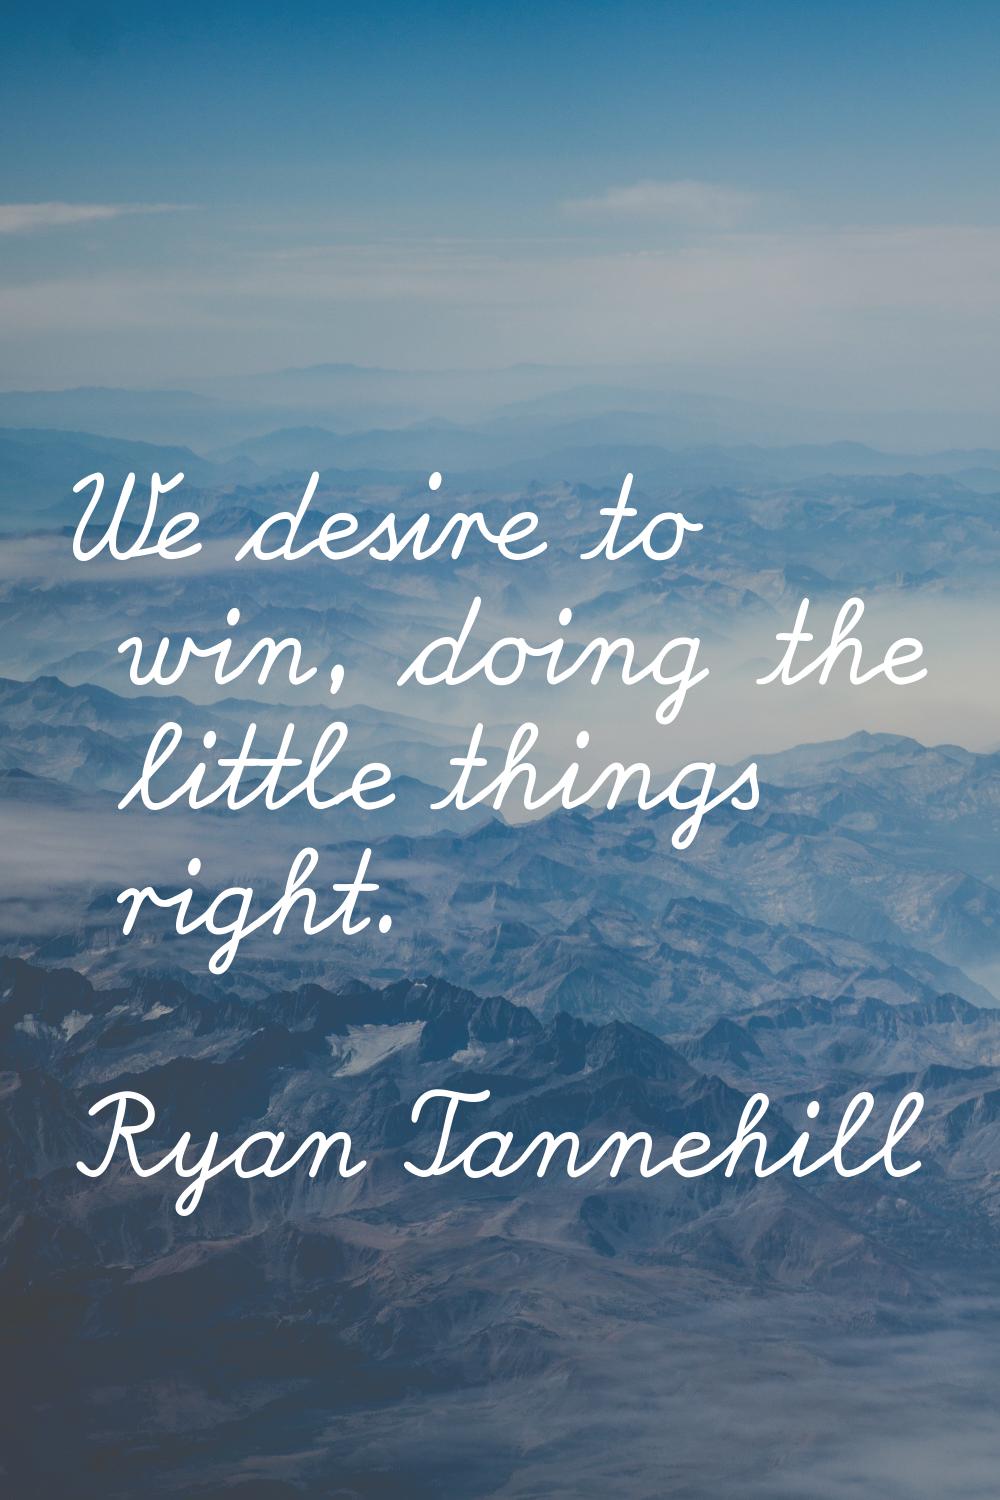 We desire to win, doing the little things right.